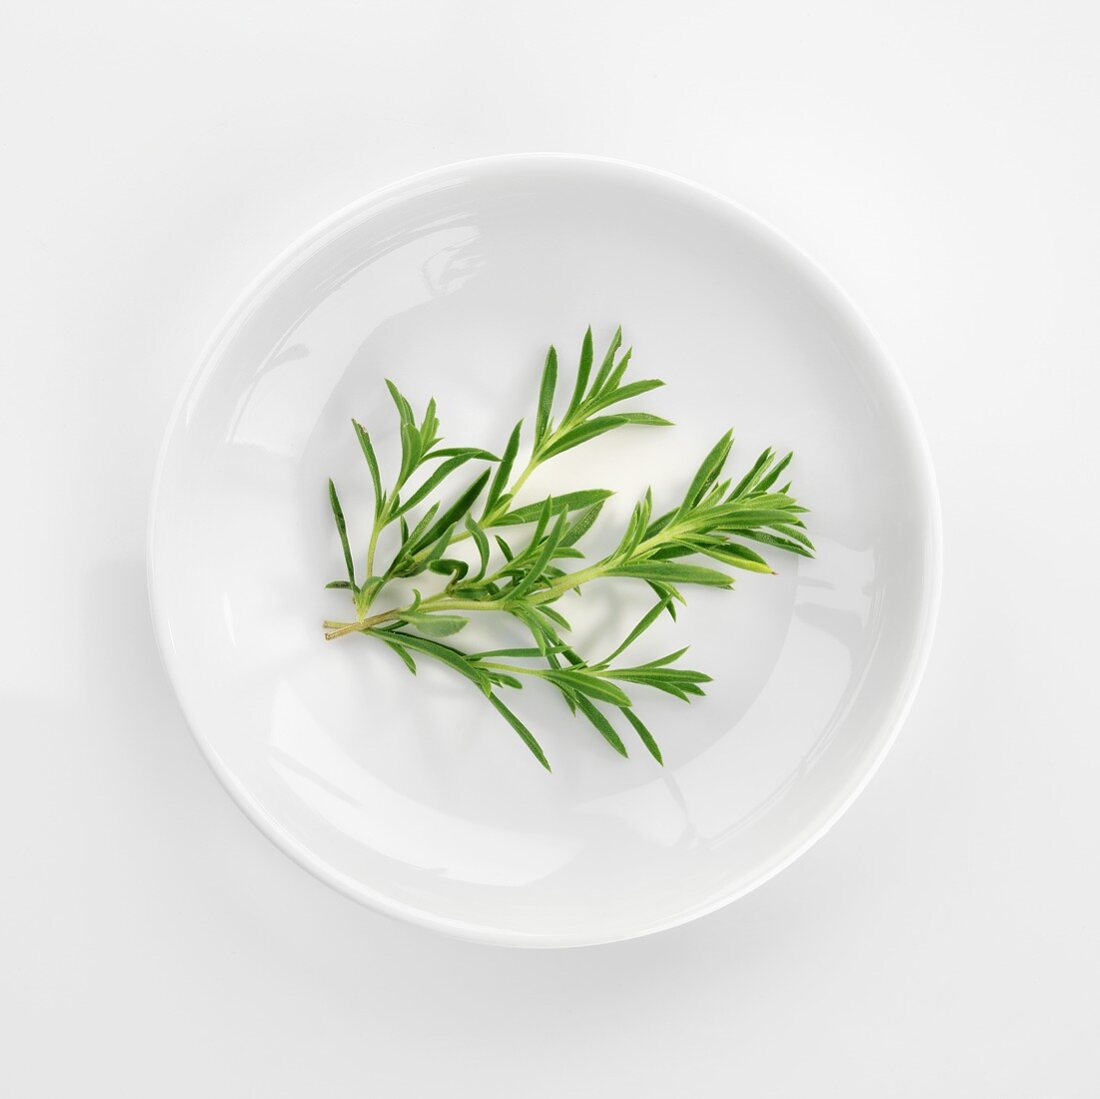 Several sprigs of savory in white dish (overhead view)